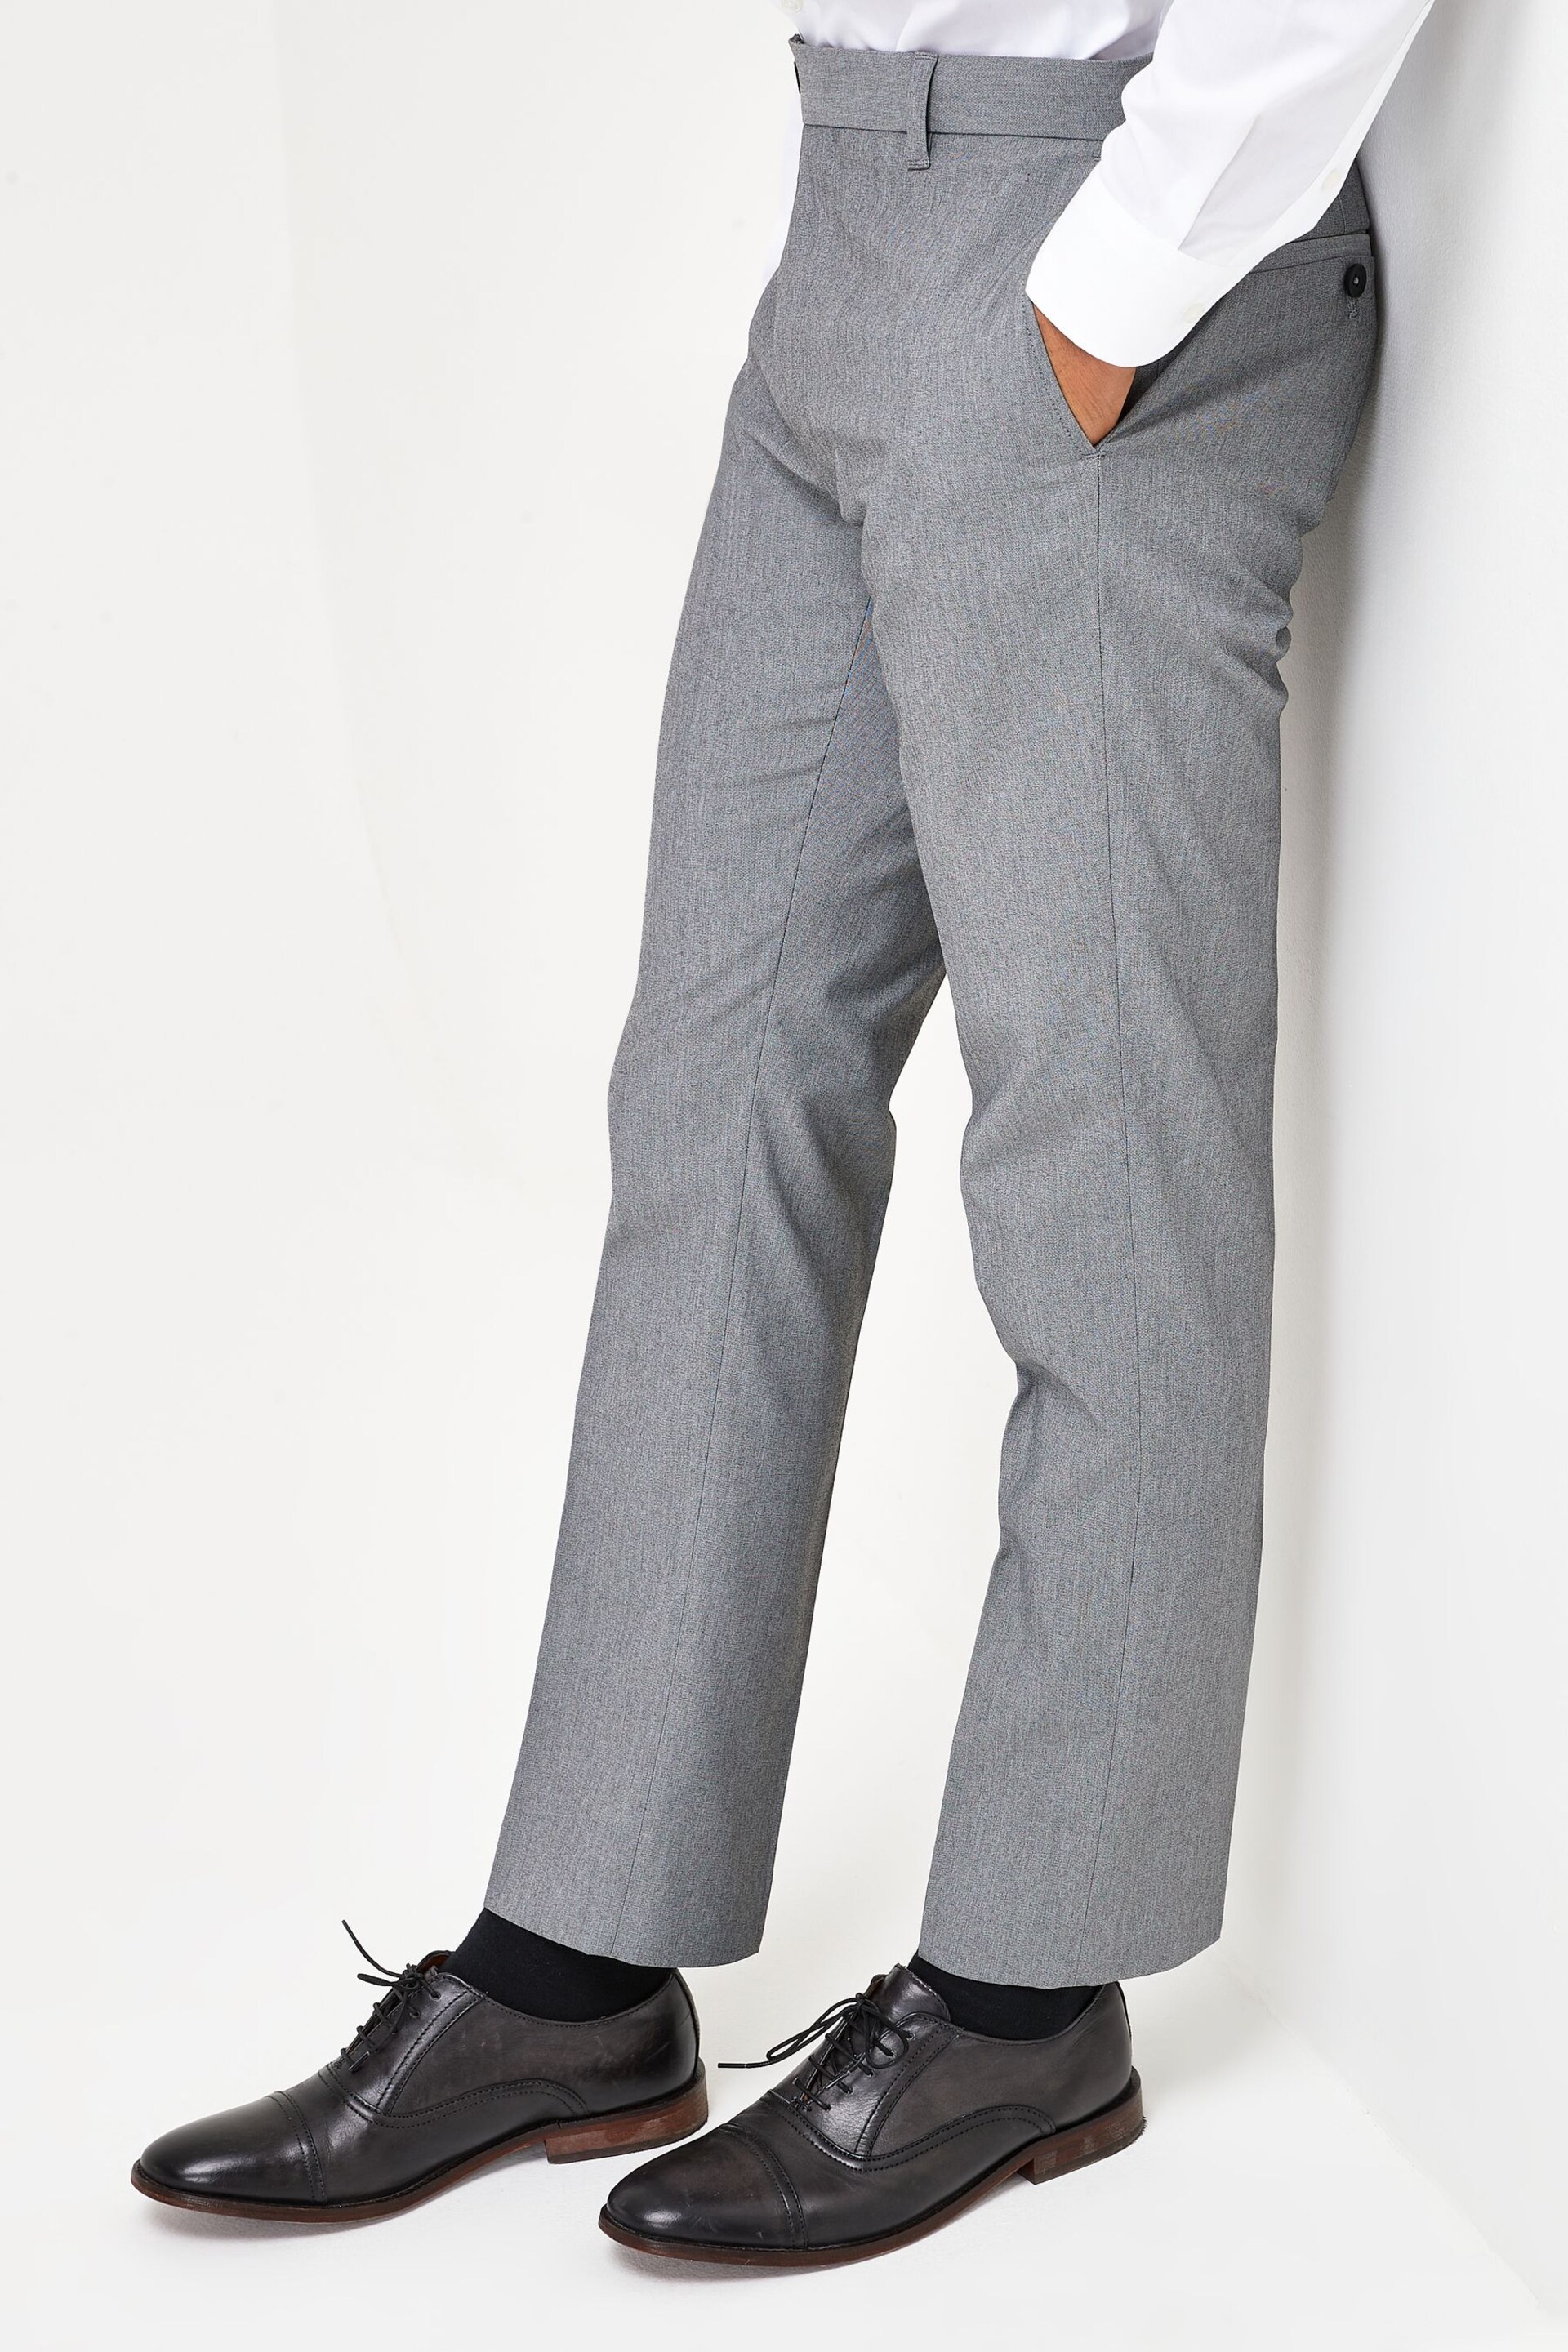 Light Grey Slim Stretch Smart Trousers - Image 4 of 7